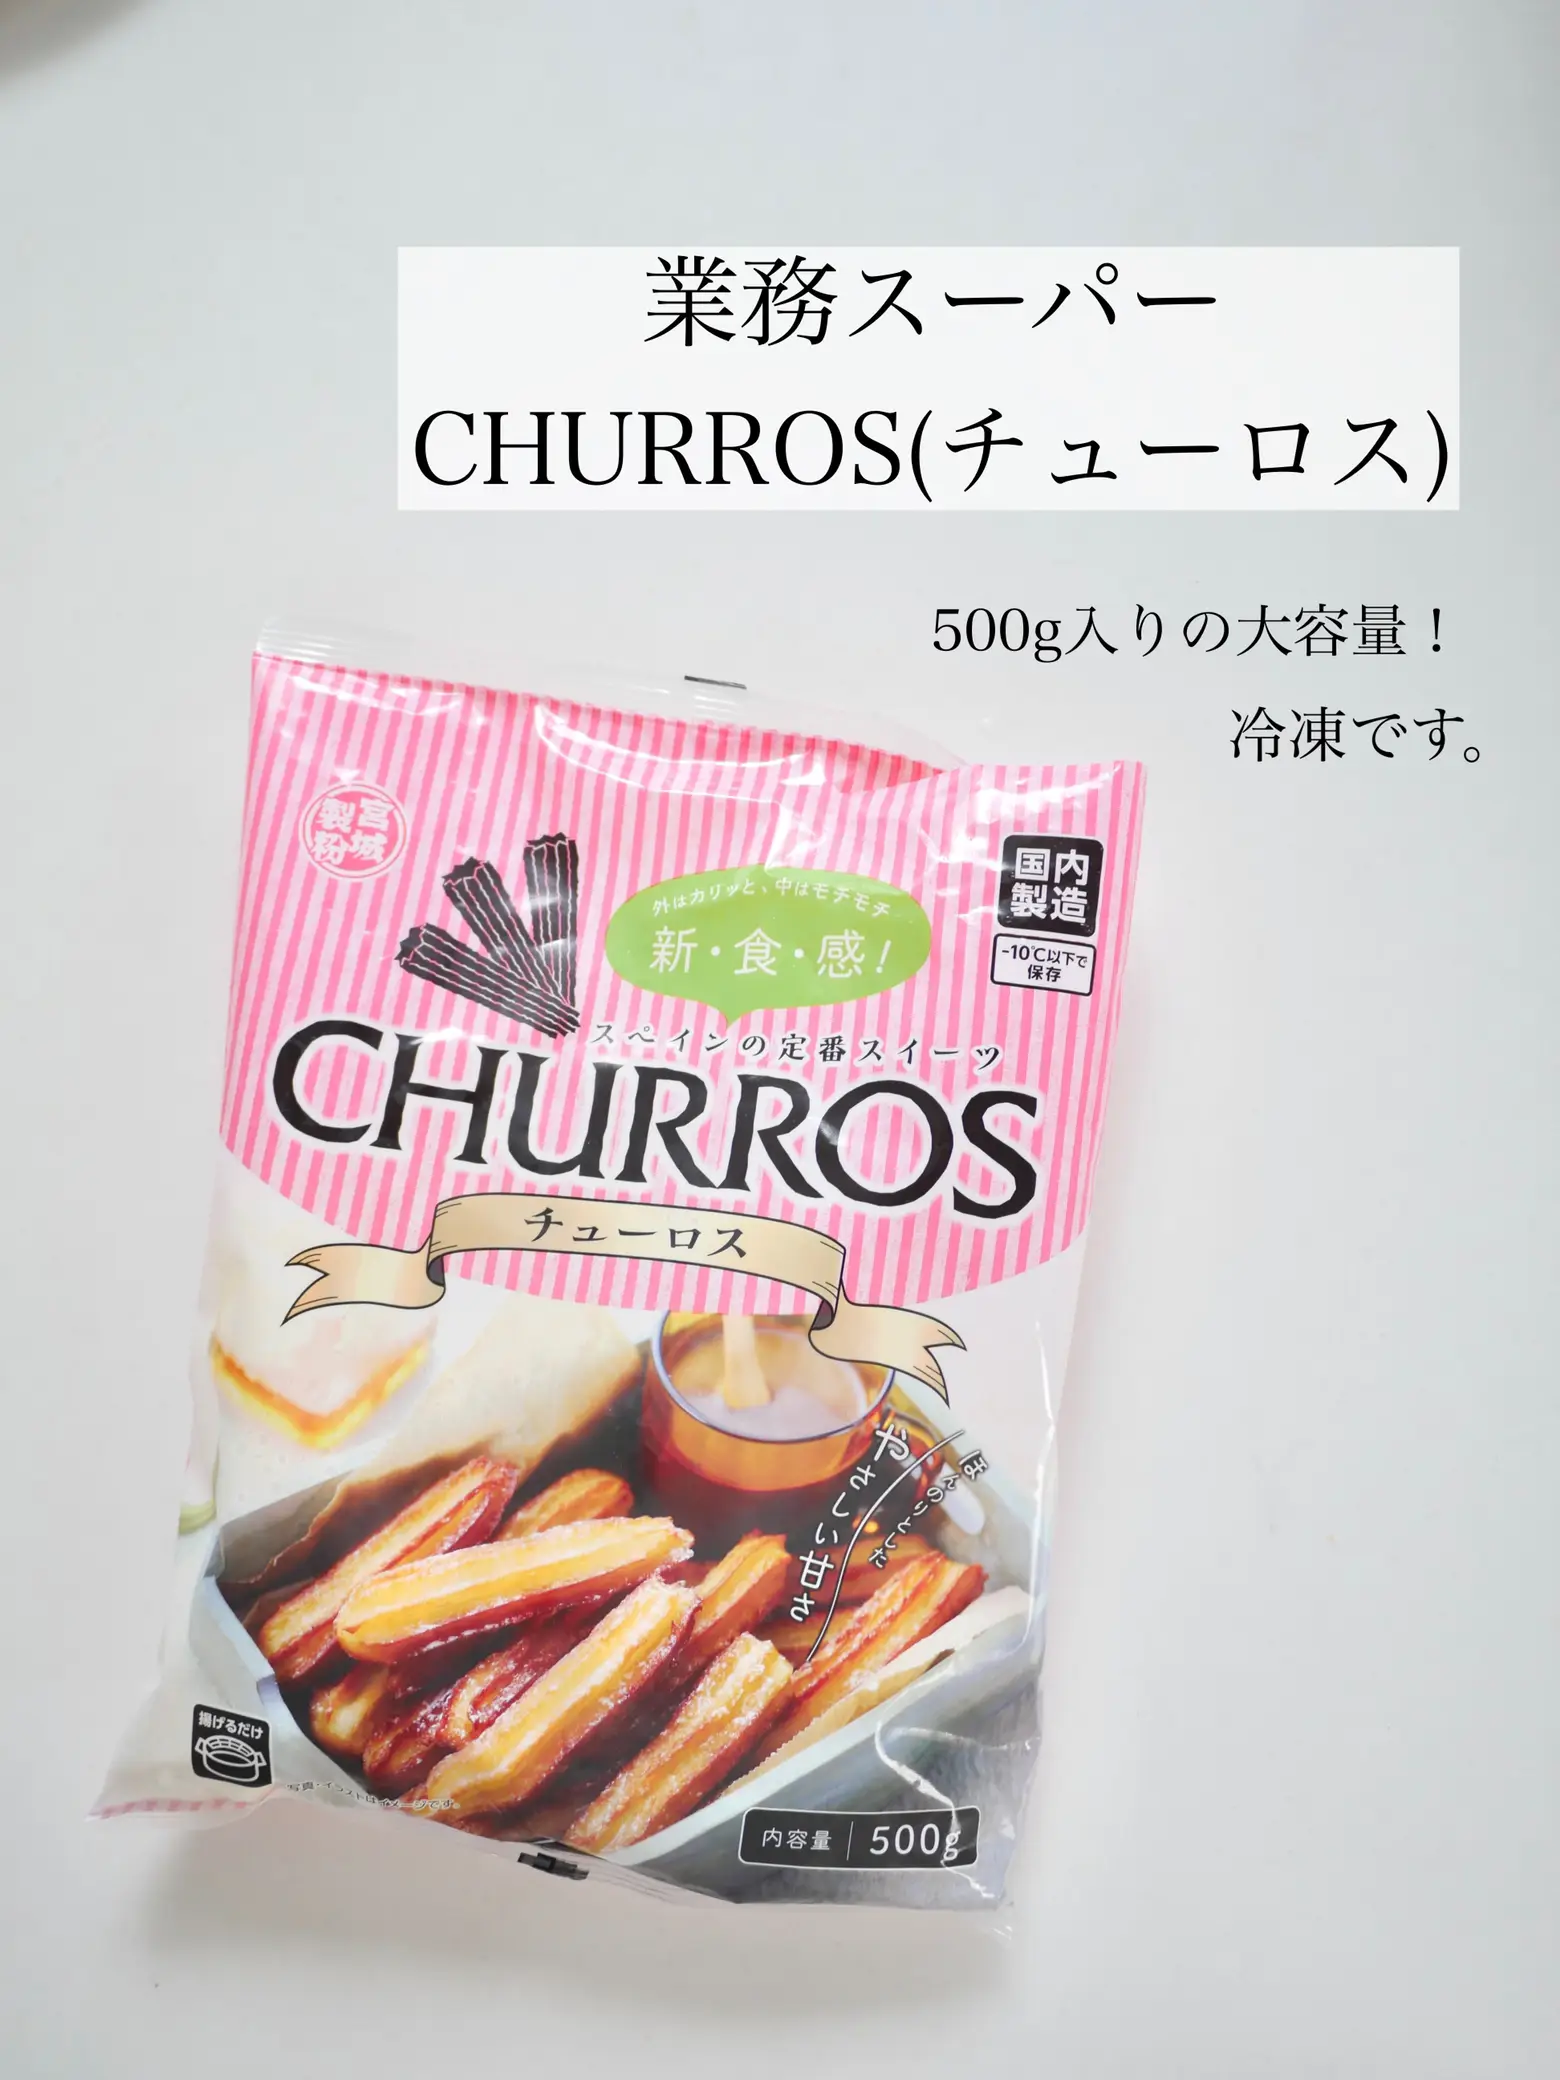 It's Snack Time–Popcorn and Churros!